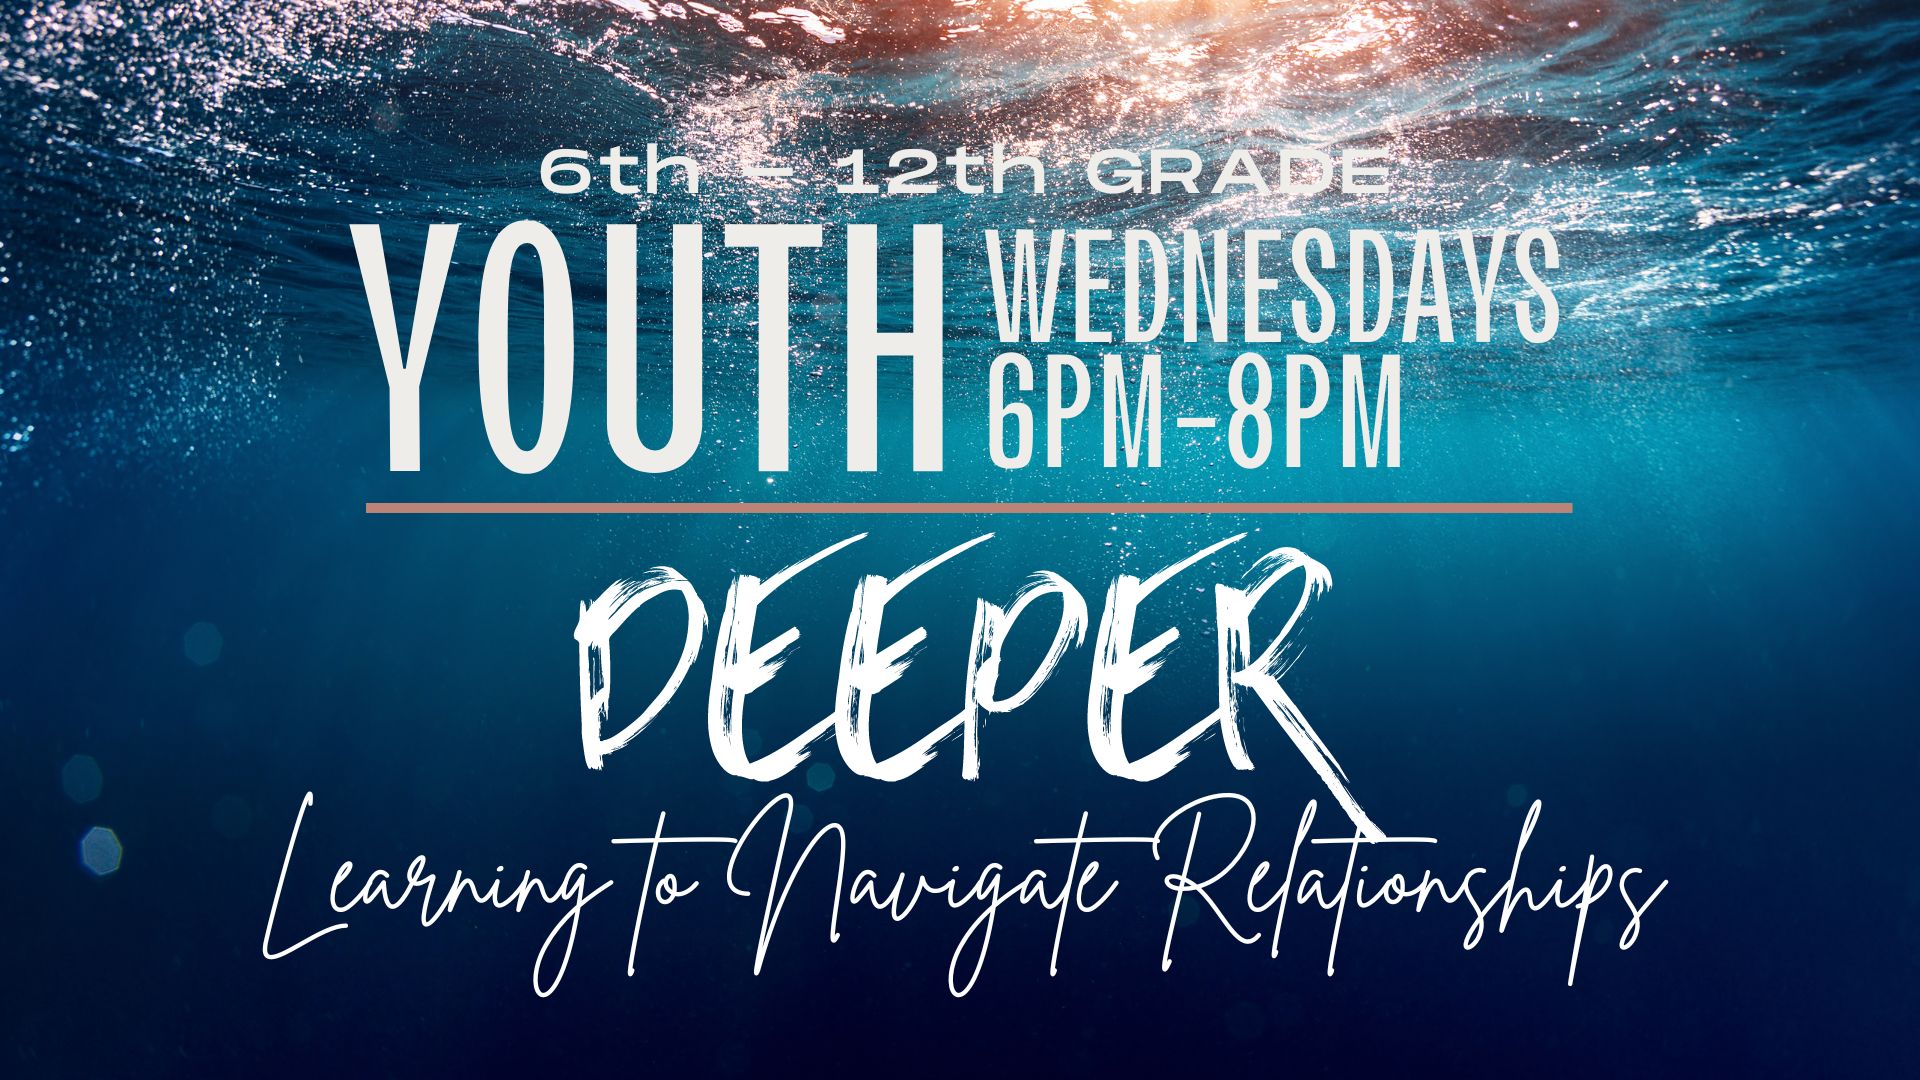 Weds Night Youth December Cancelled (1)